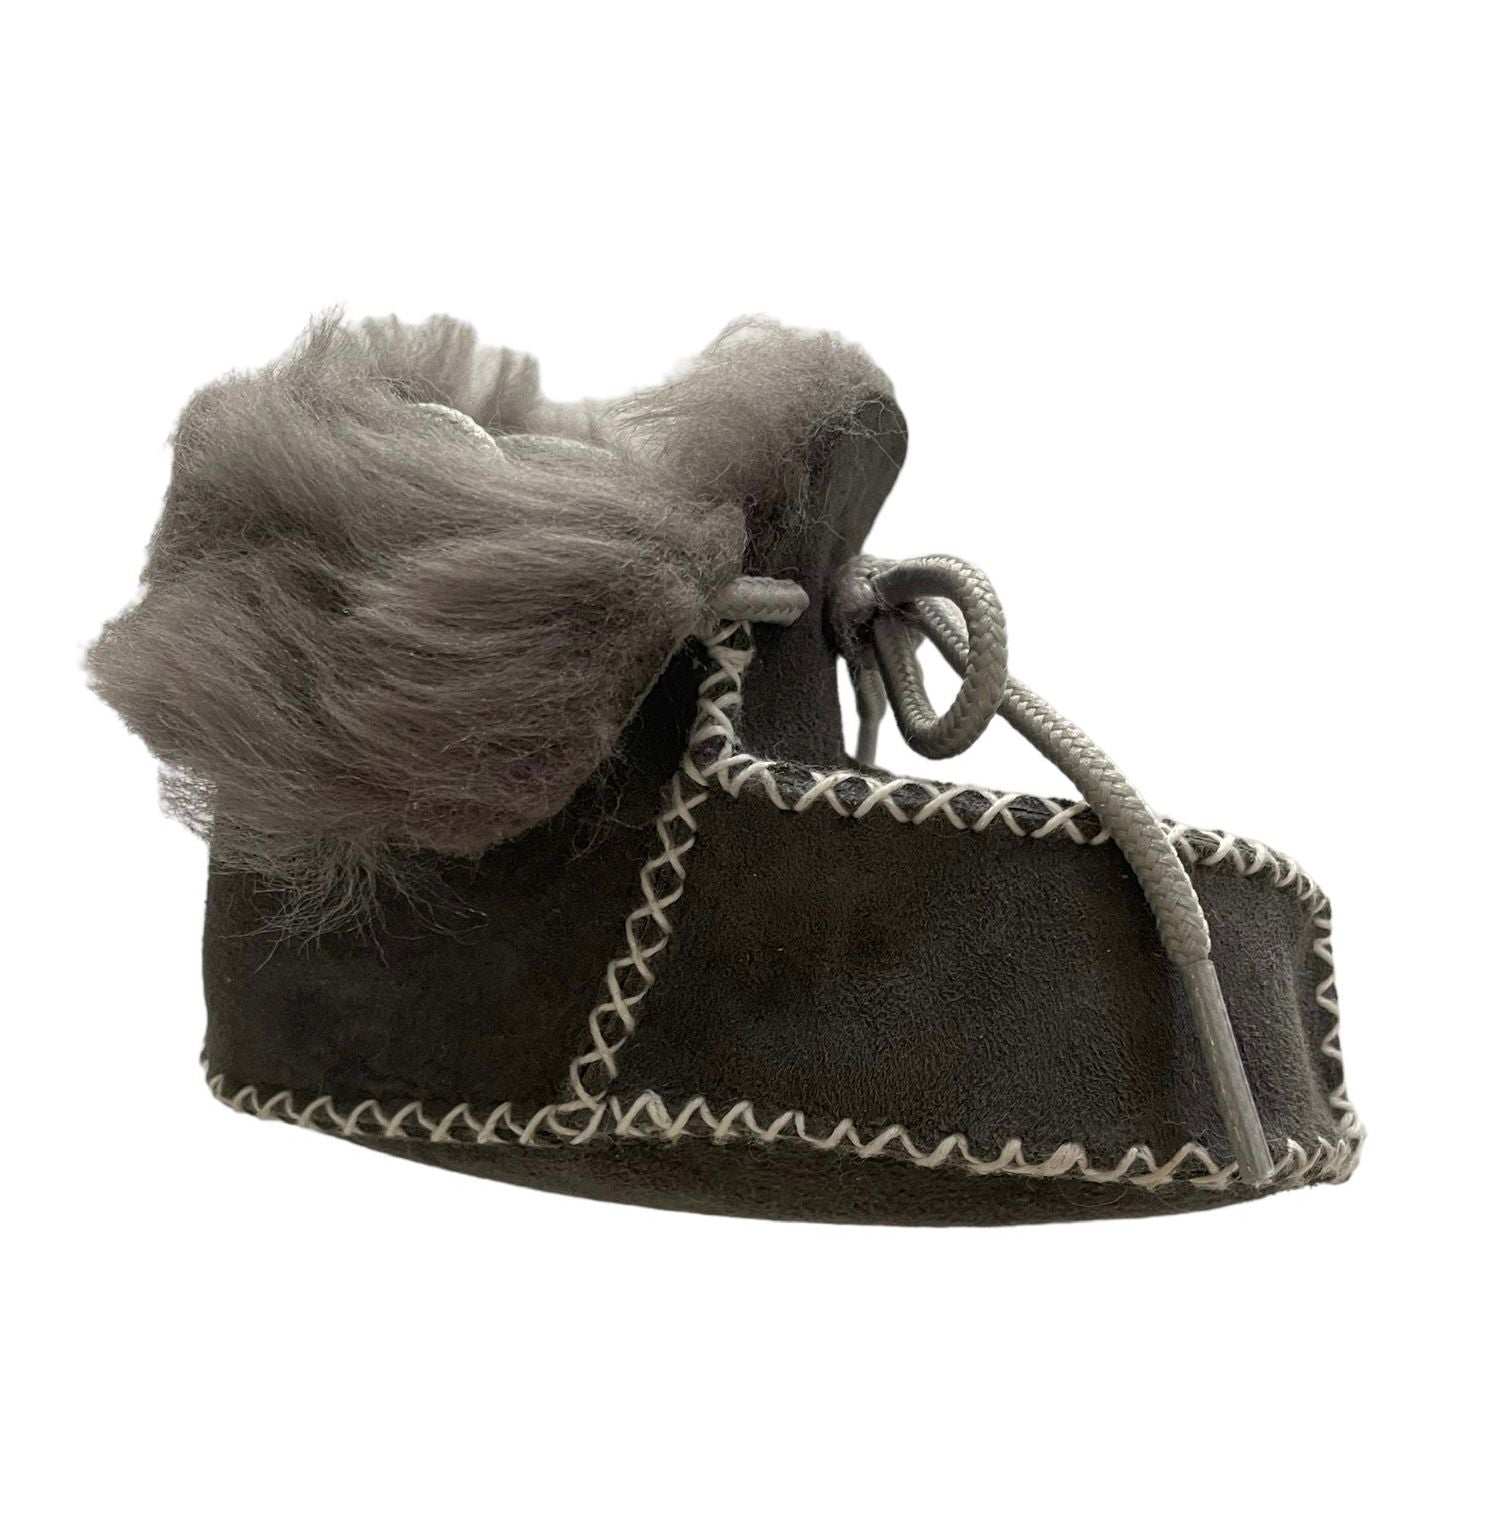 Sheepskin baby booties in grey with cord tie